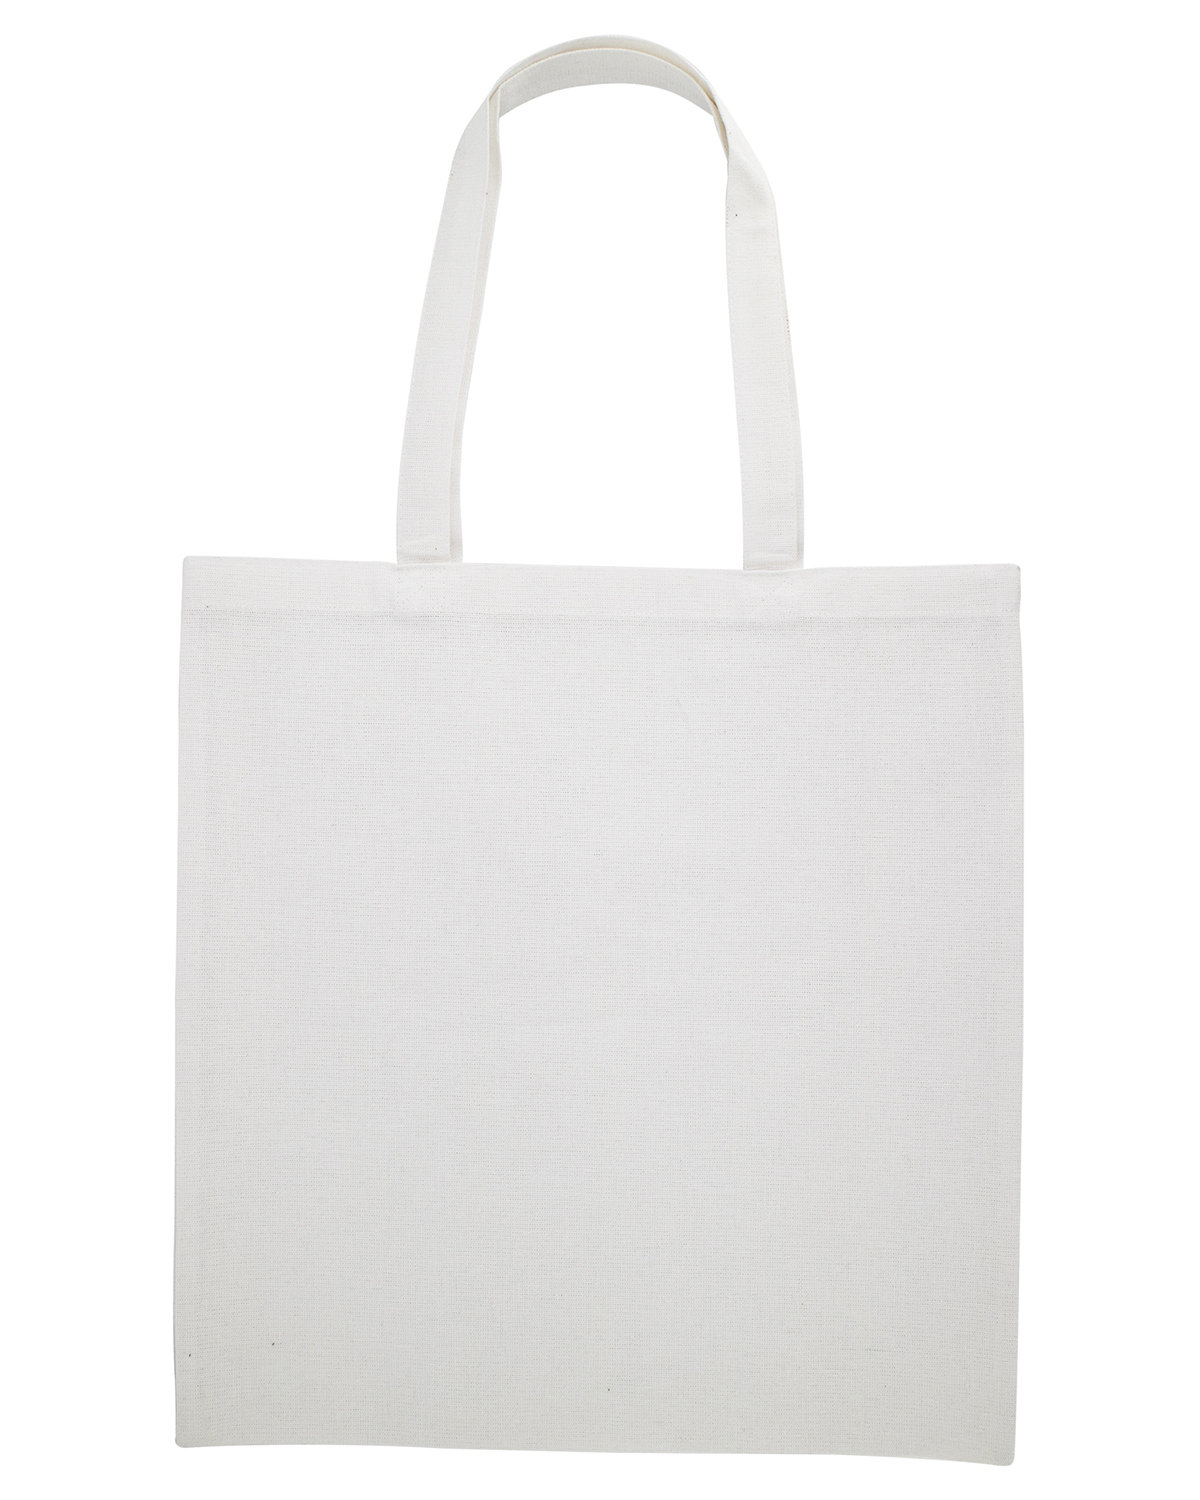 OAD Midweight Recycled Cotton Canvas Tote Bag | alphabroder